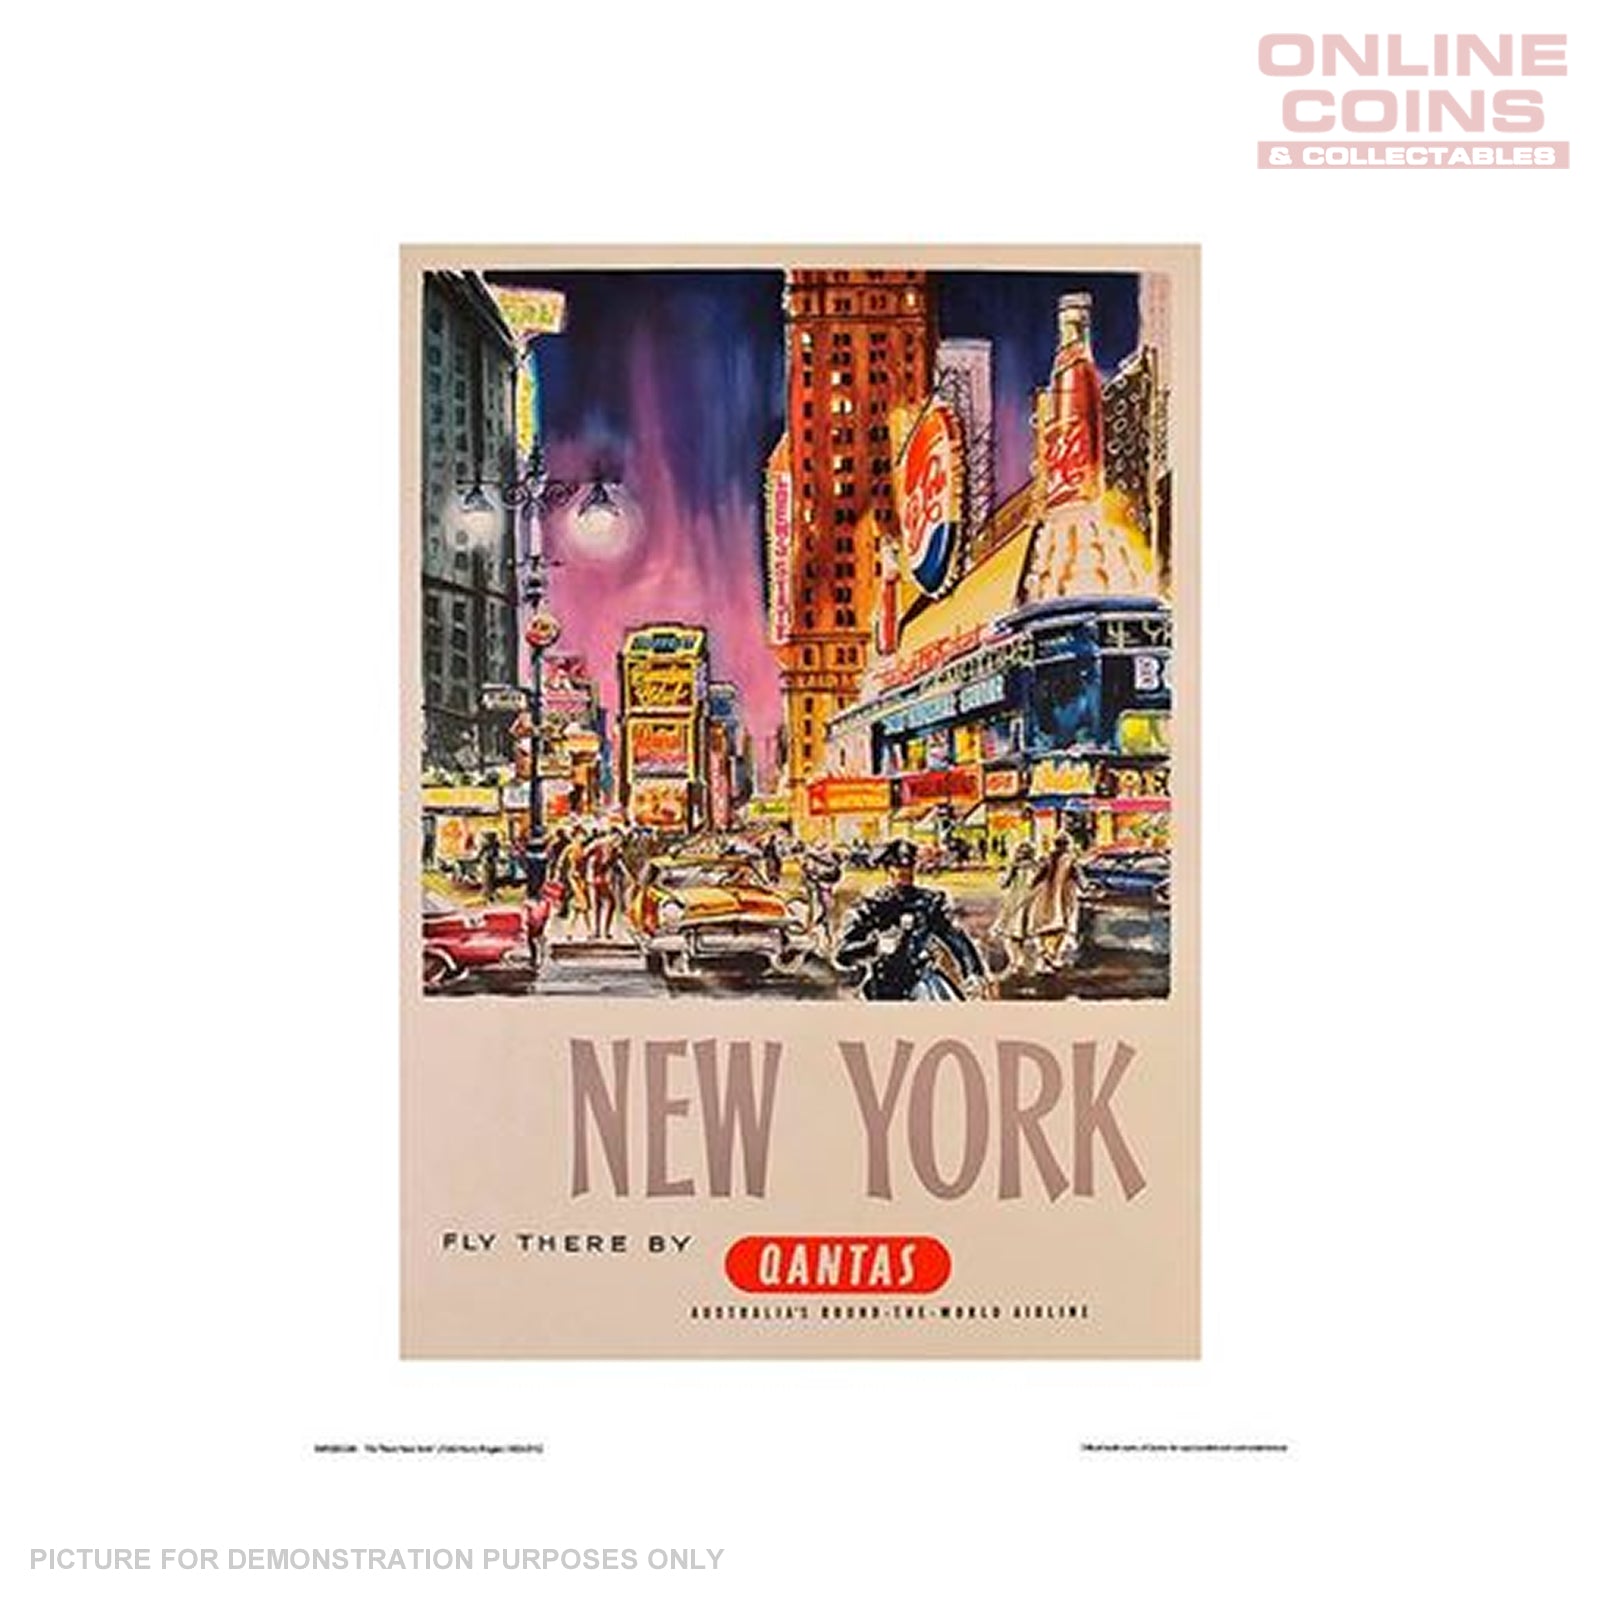 QANTAS Officially Licensed Art Print - Fly There New York